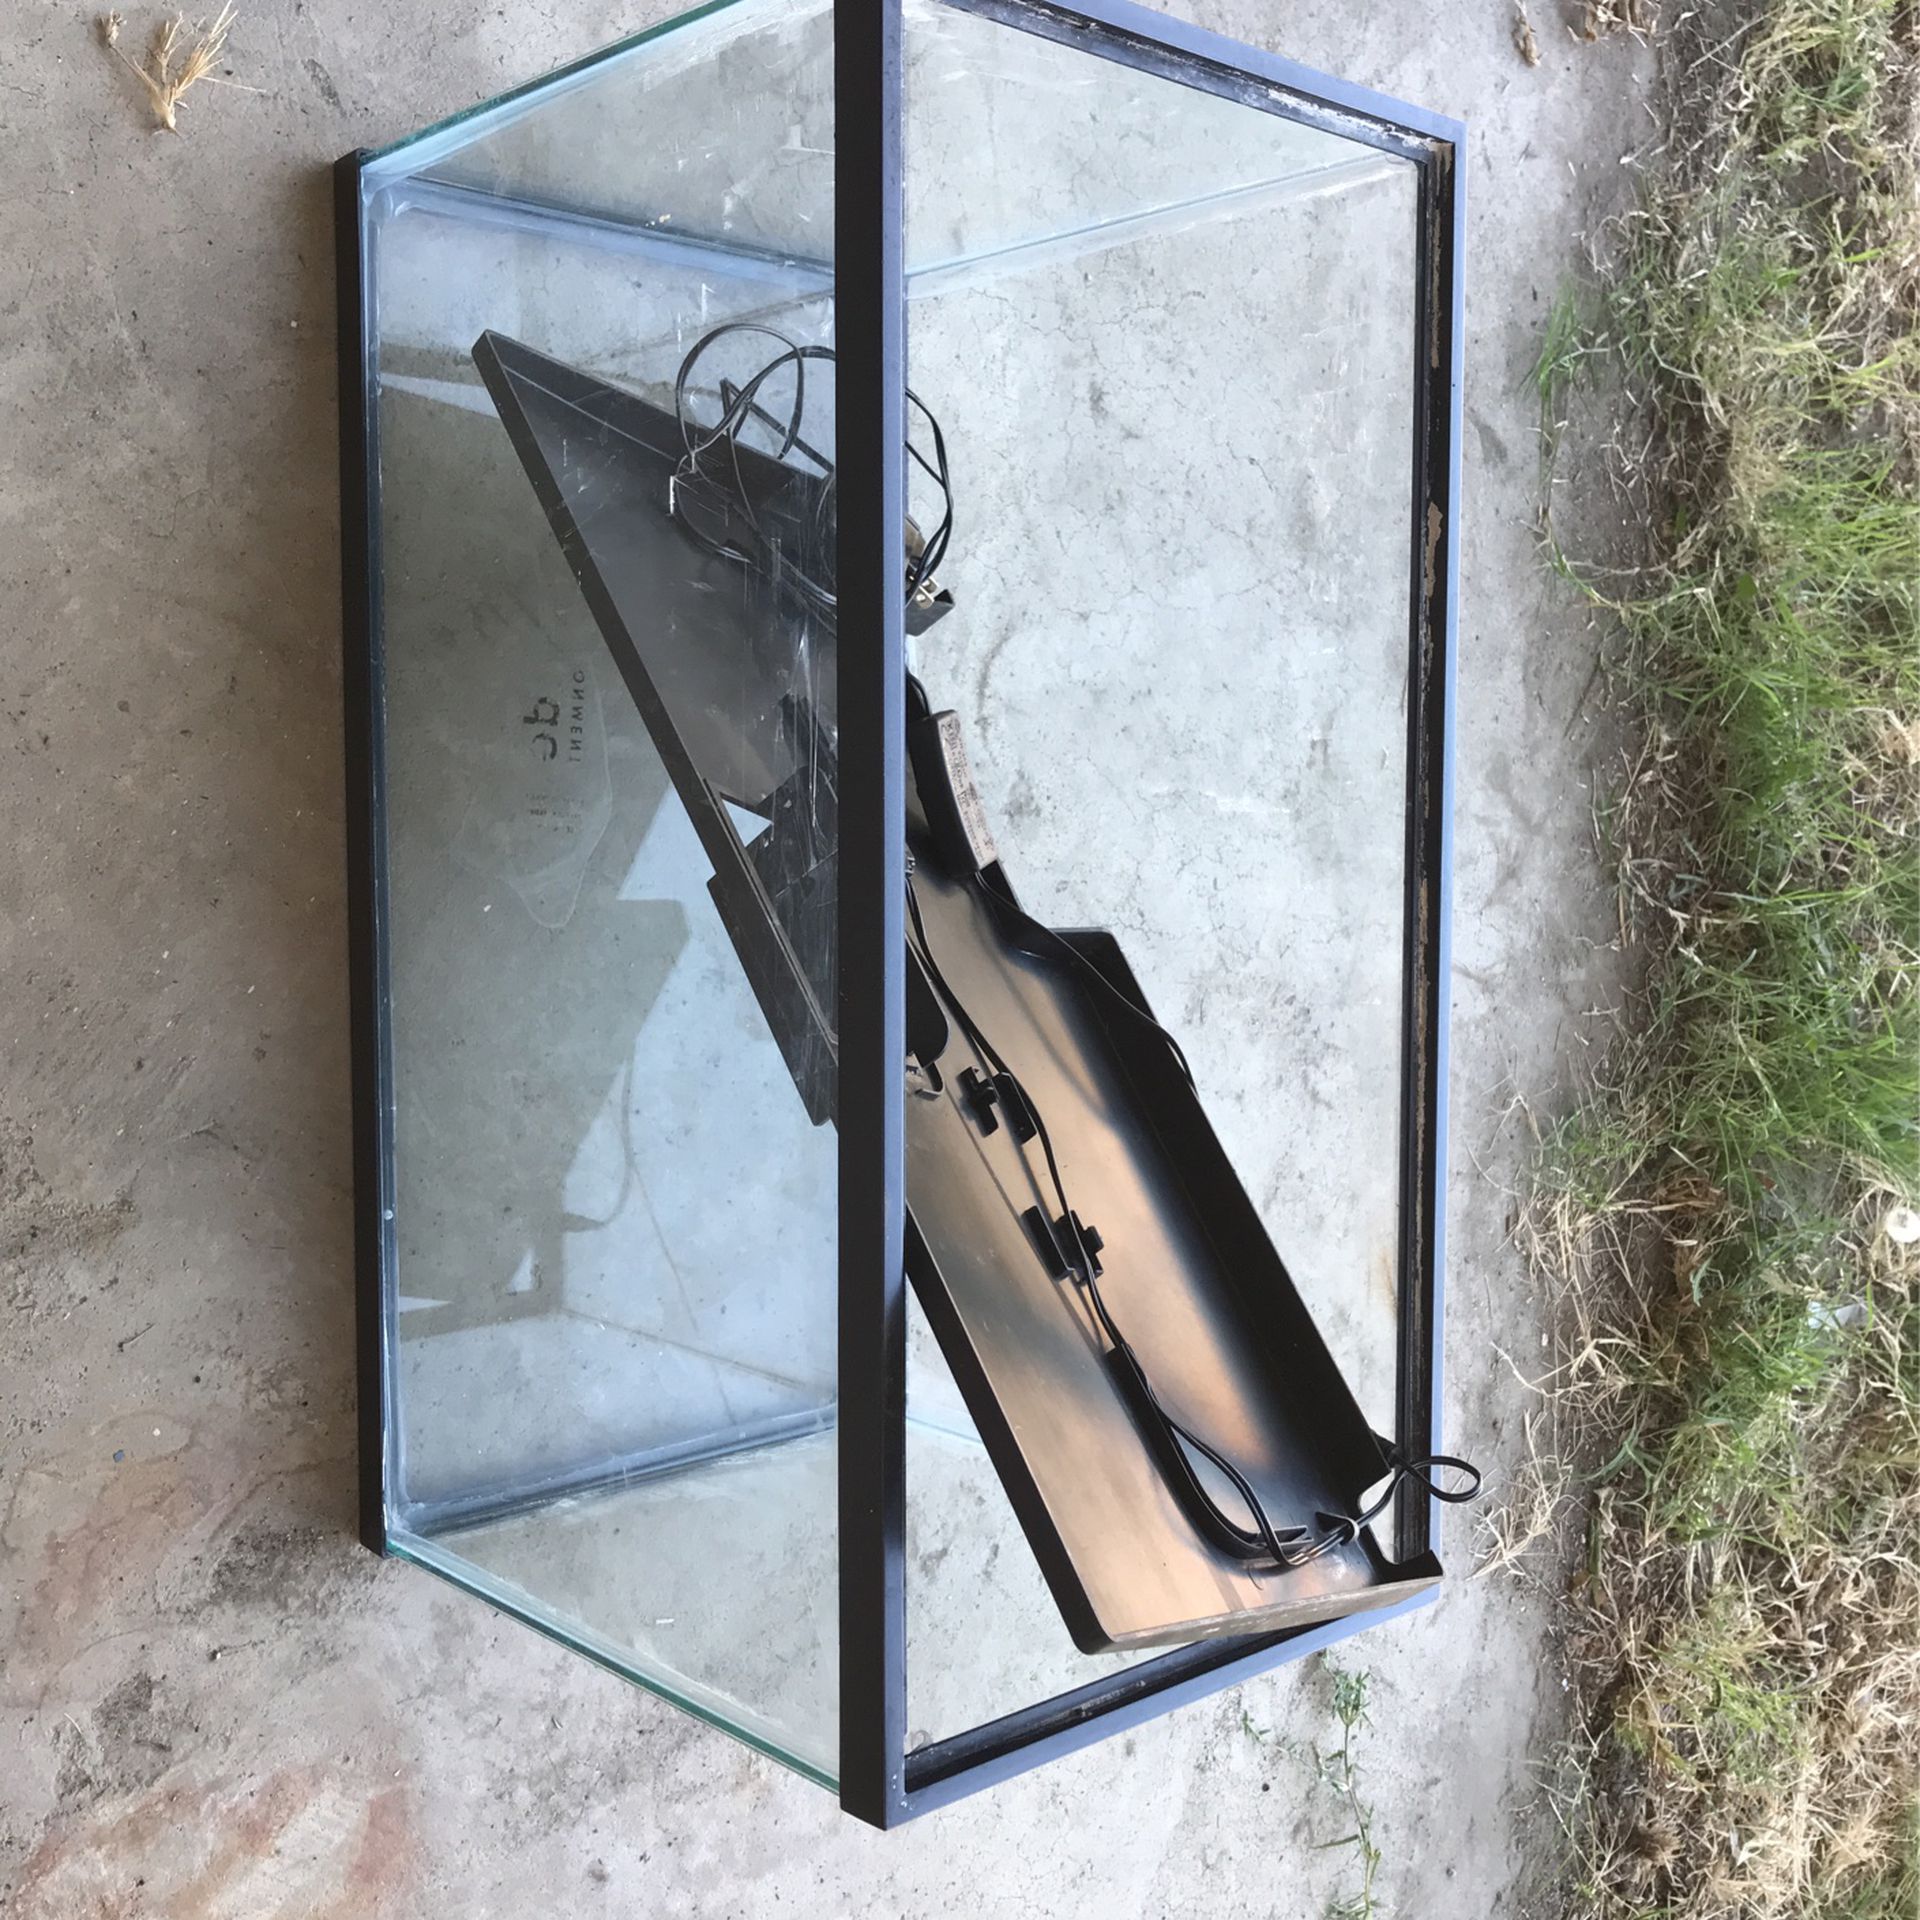 10 Gal Fish Tank With Small Light Cover Included